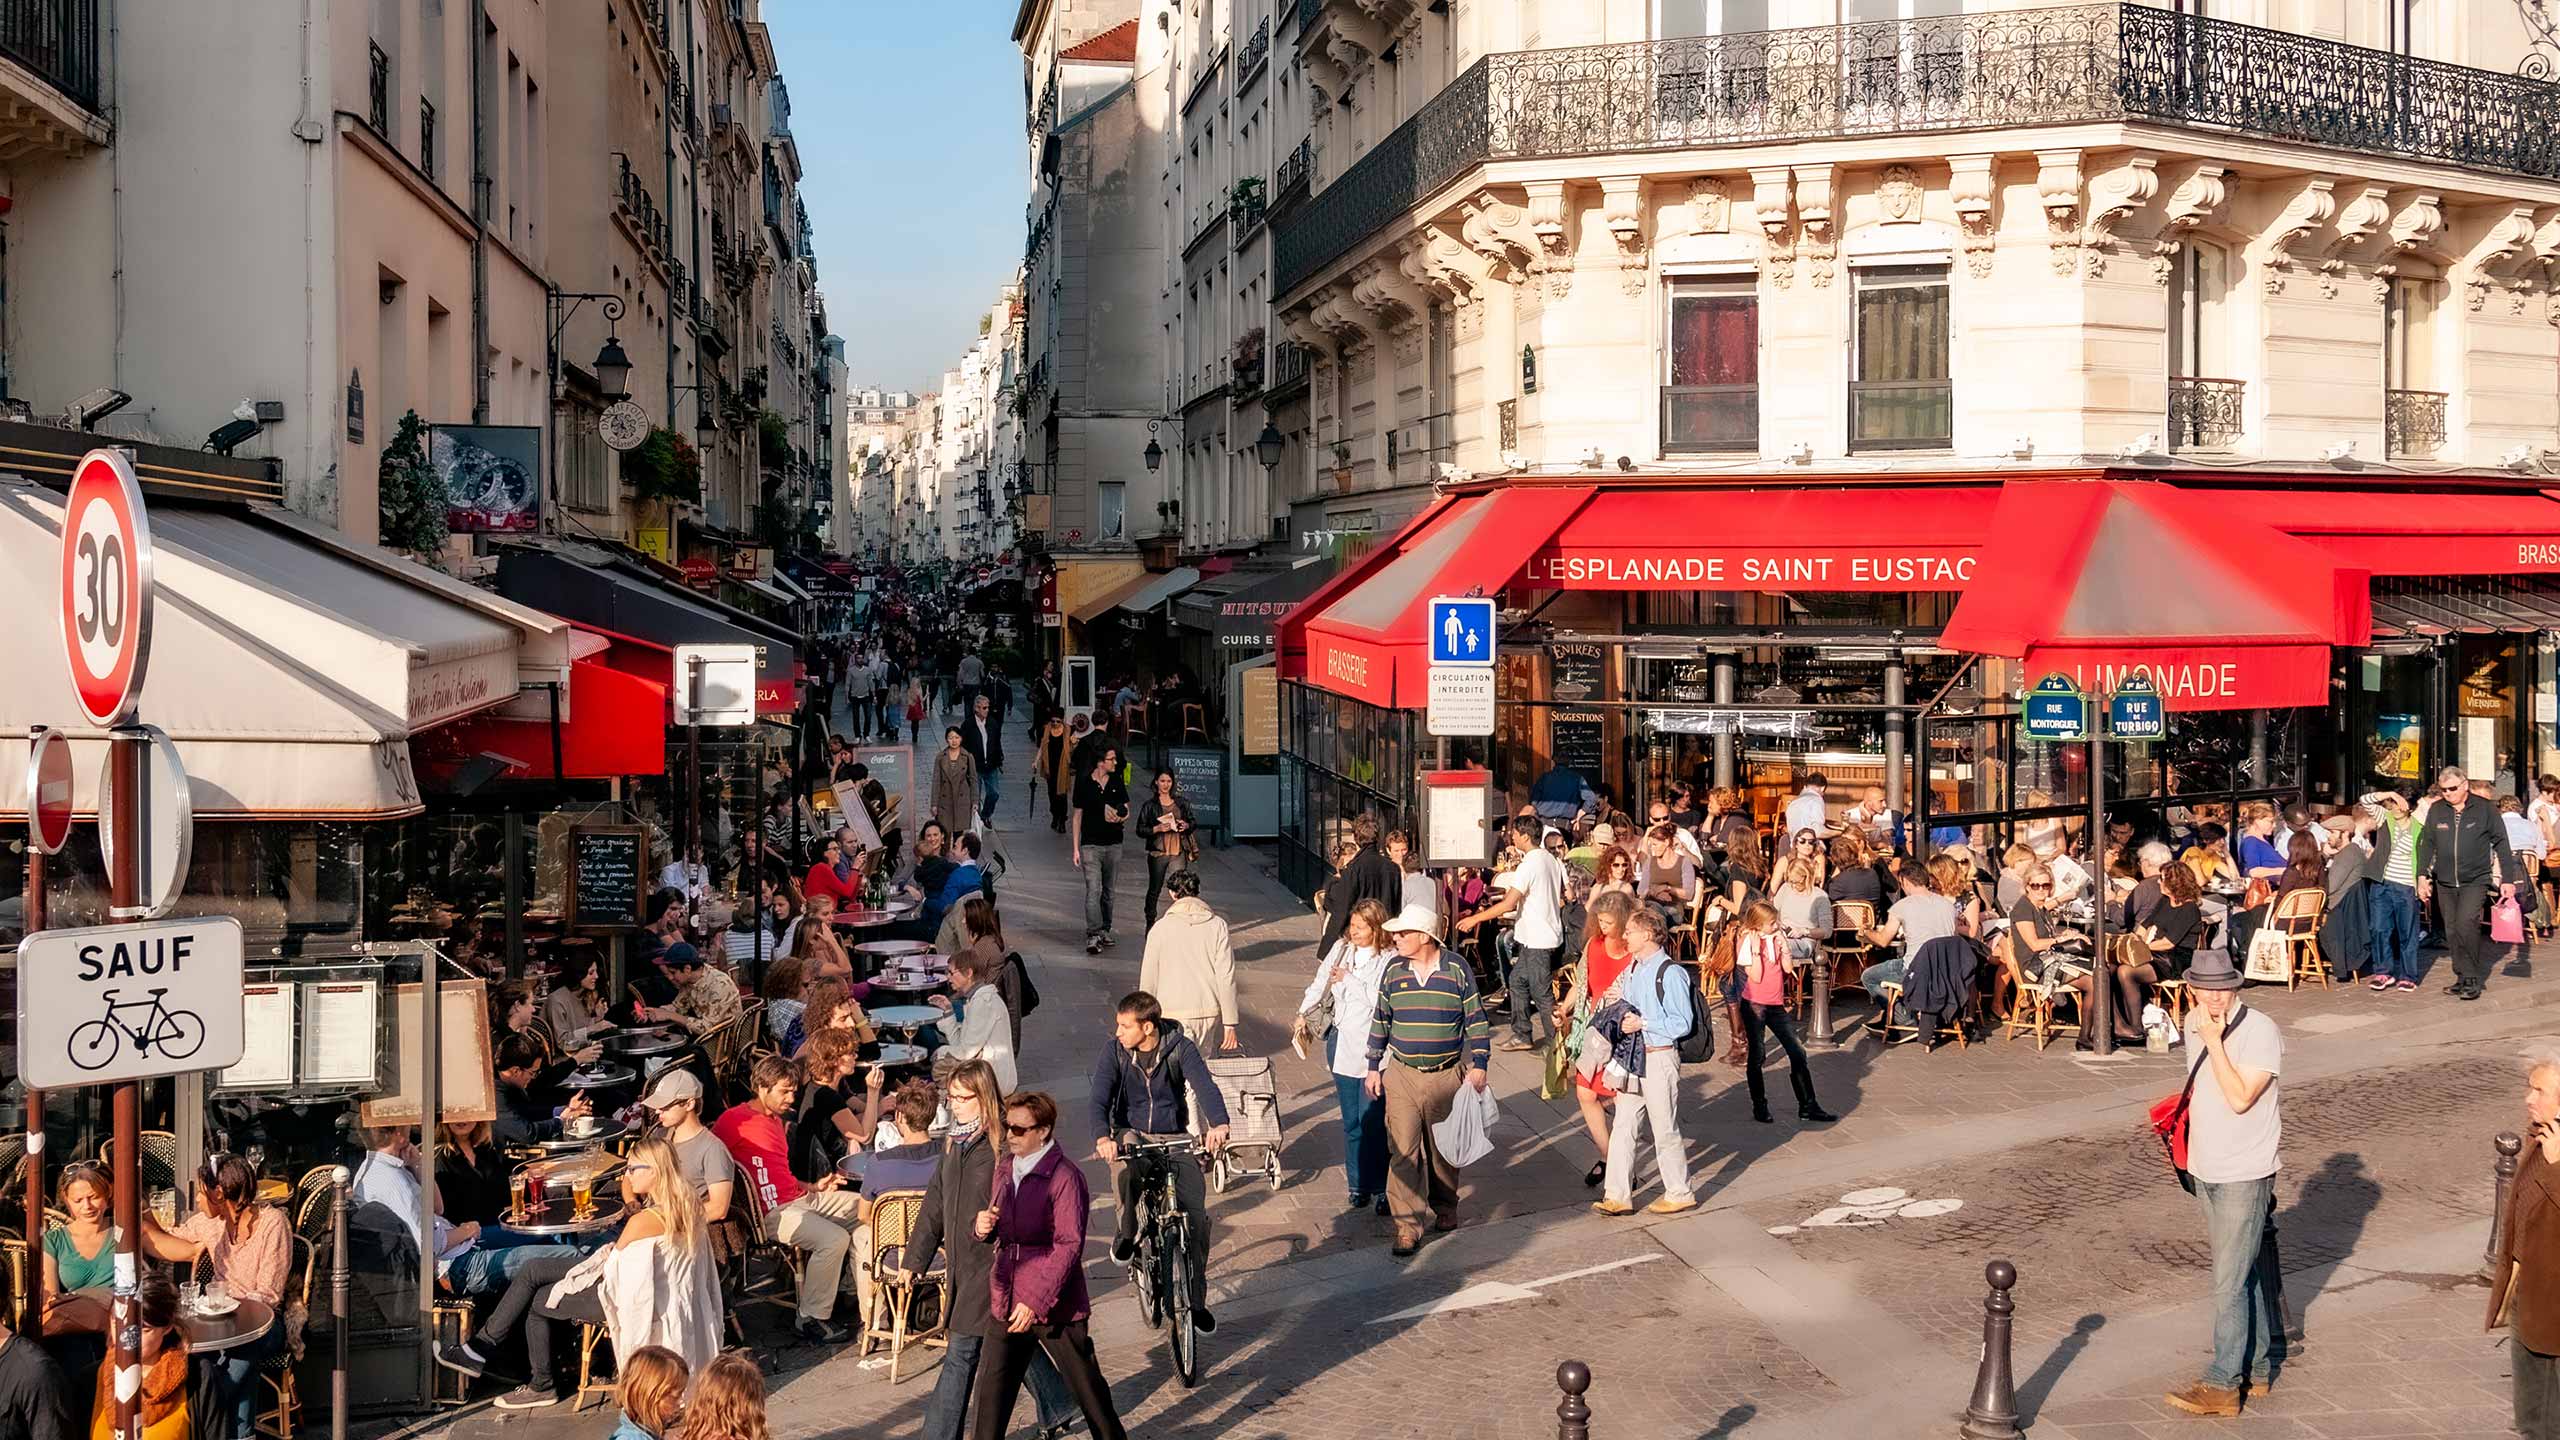 Rue de Turbigo in Paris flanked by stone buildings and filled with people walking, cycling, and sitting at sidewalk cafes as far as the eye can see